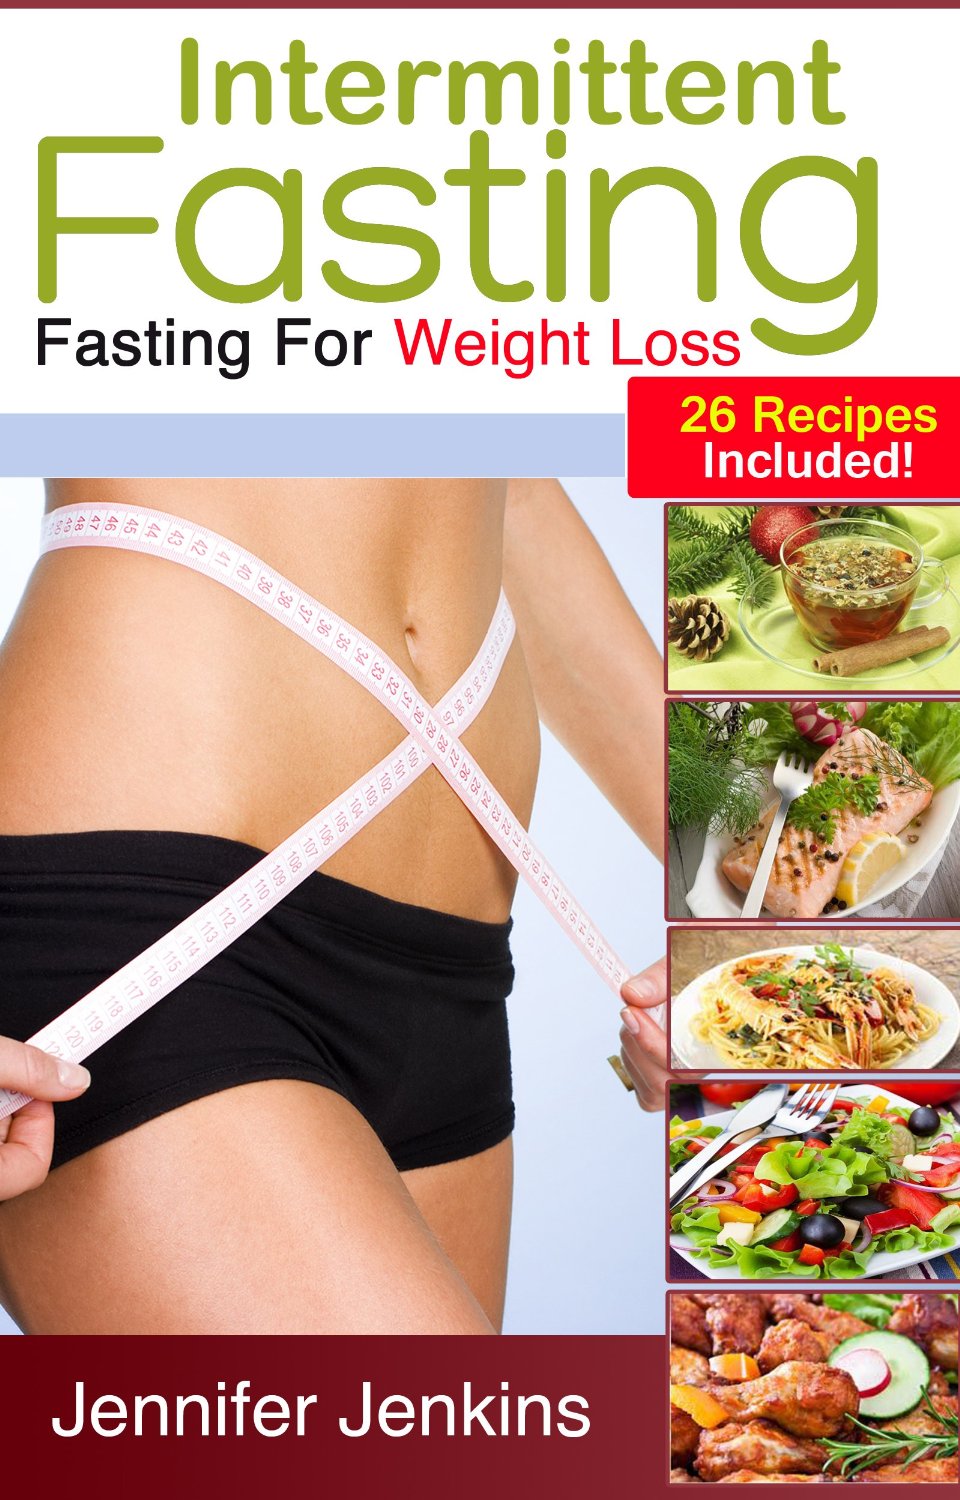 Intermittent Fasting – Fasting For Weight Loss! (26 Recipes Included) by Jennifer Jenkins